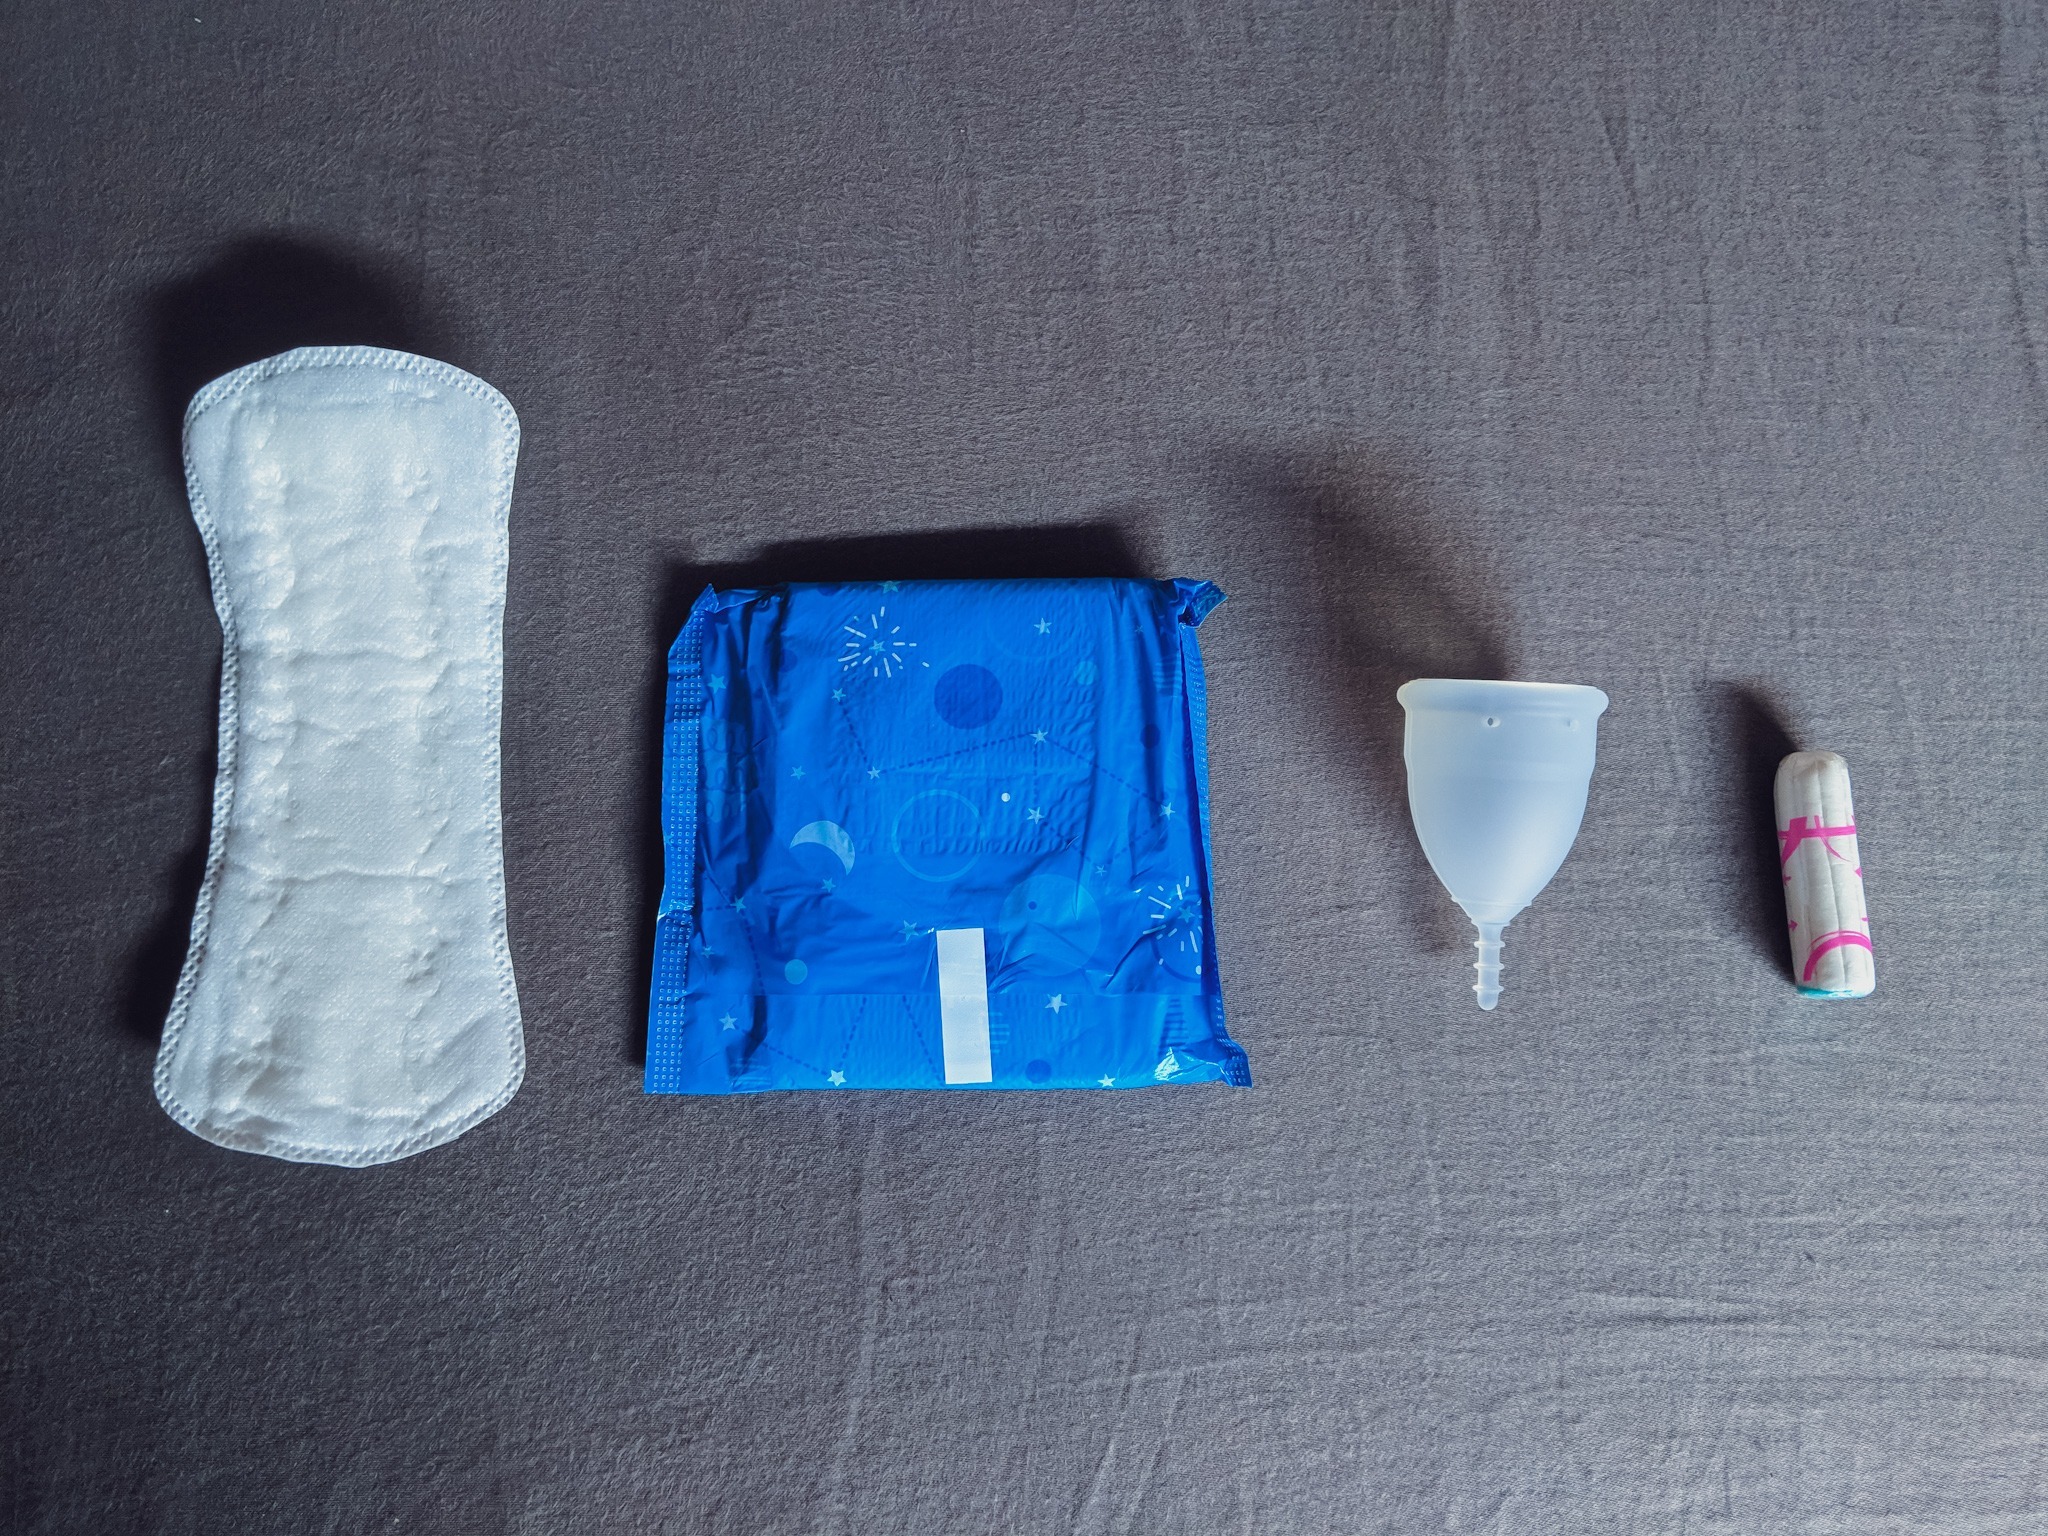 The menstrual cup – the best thing to happen to my period